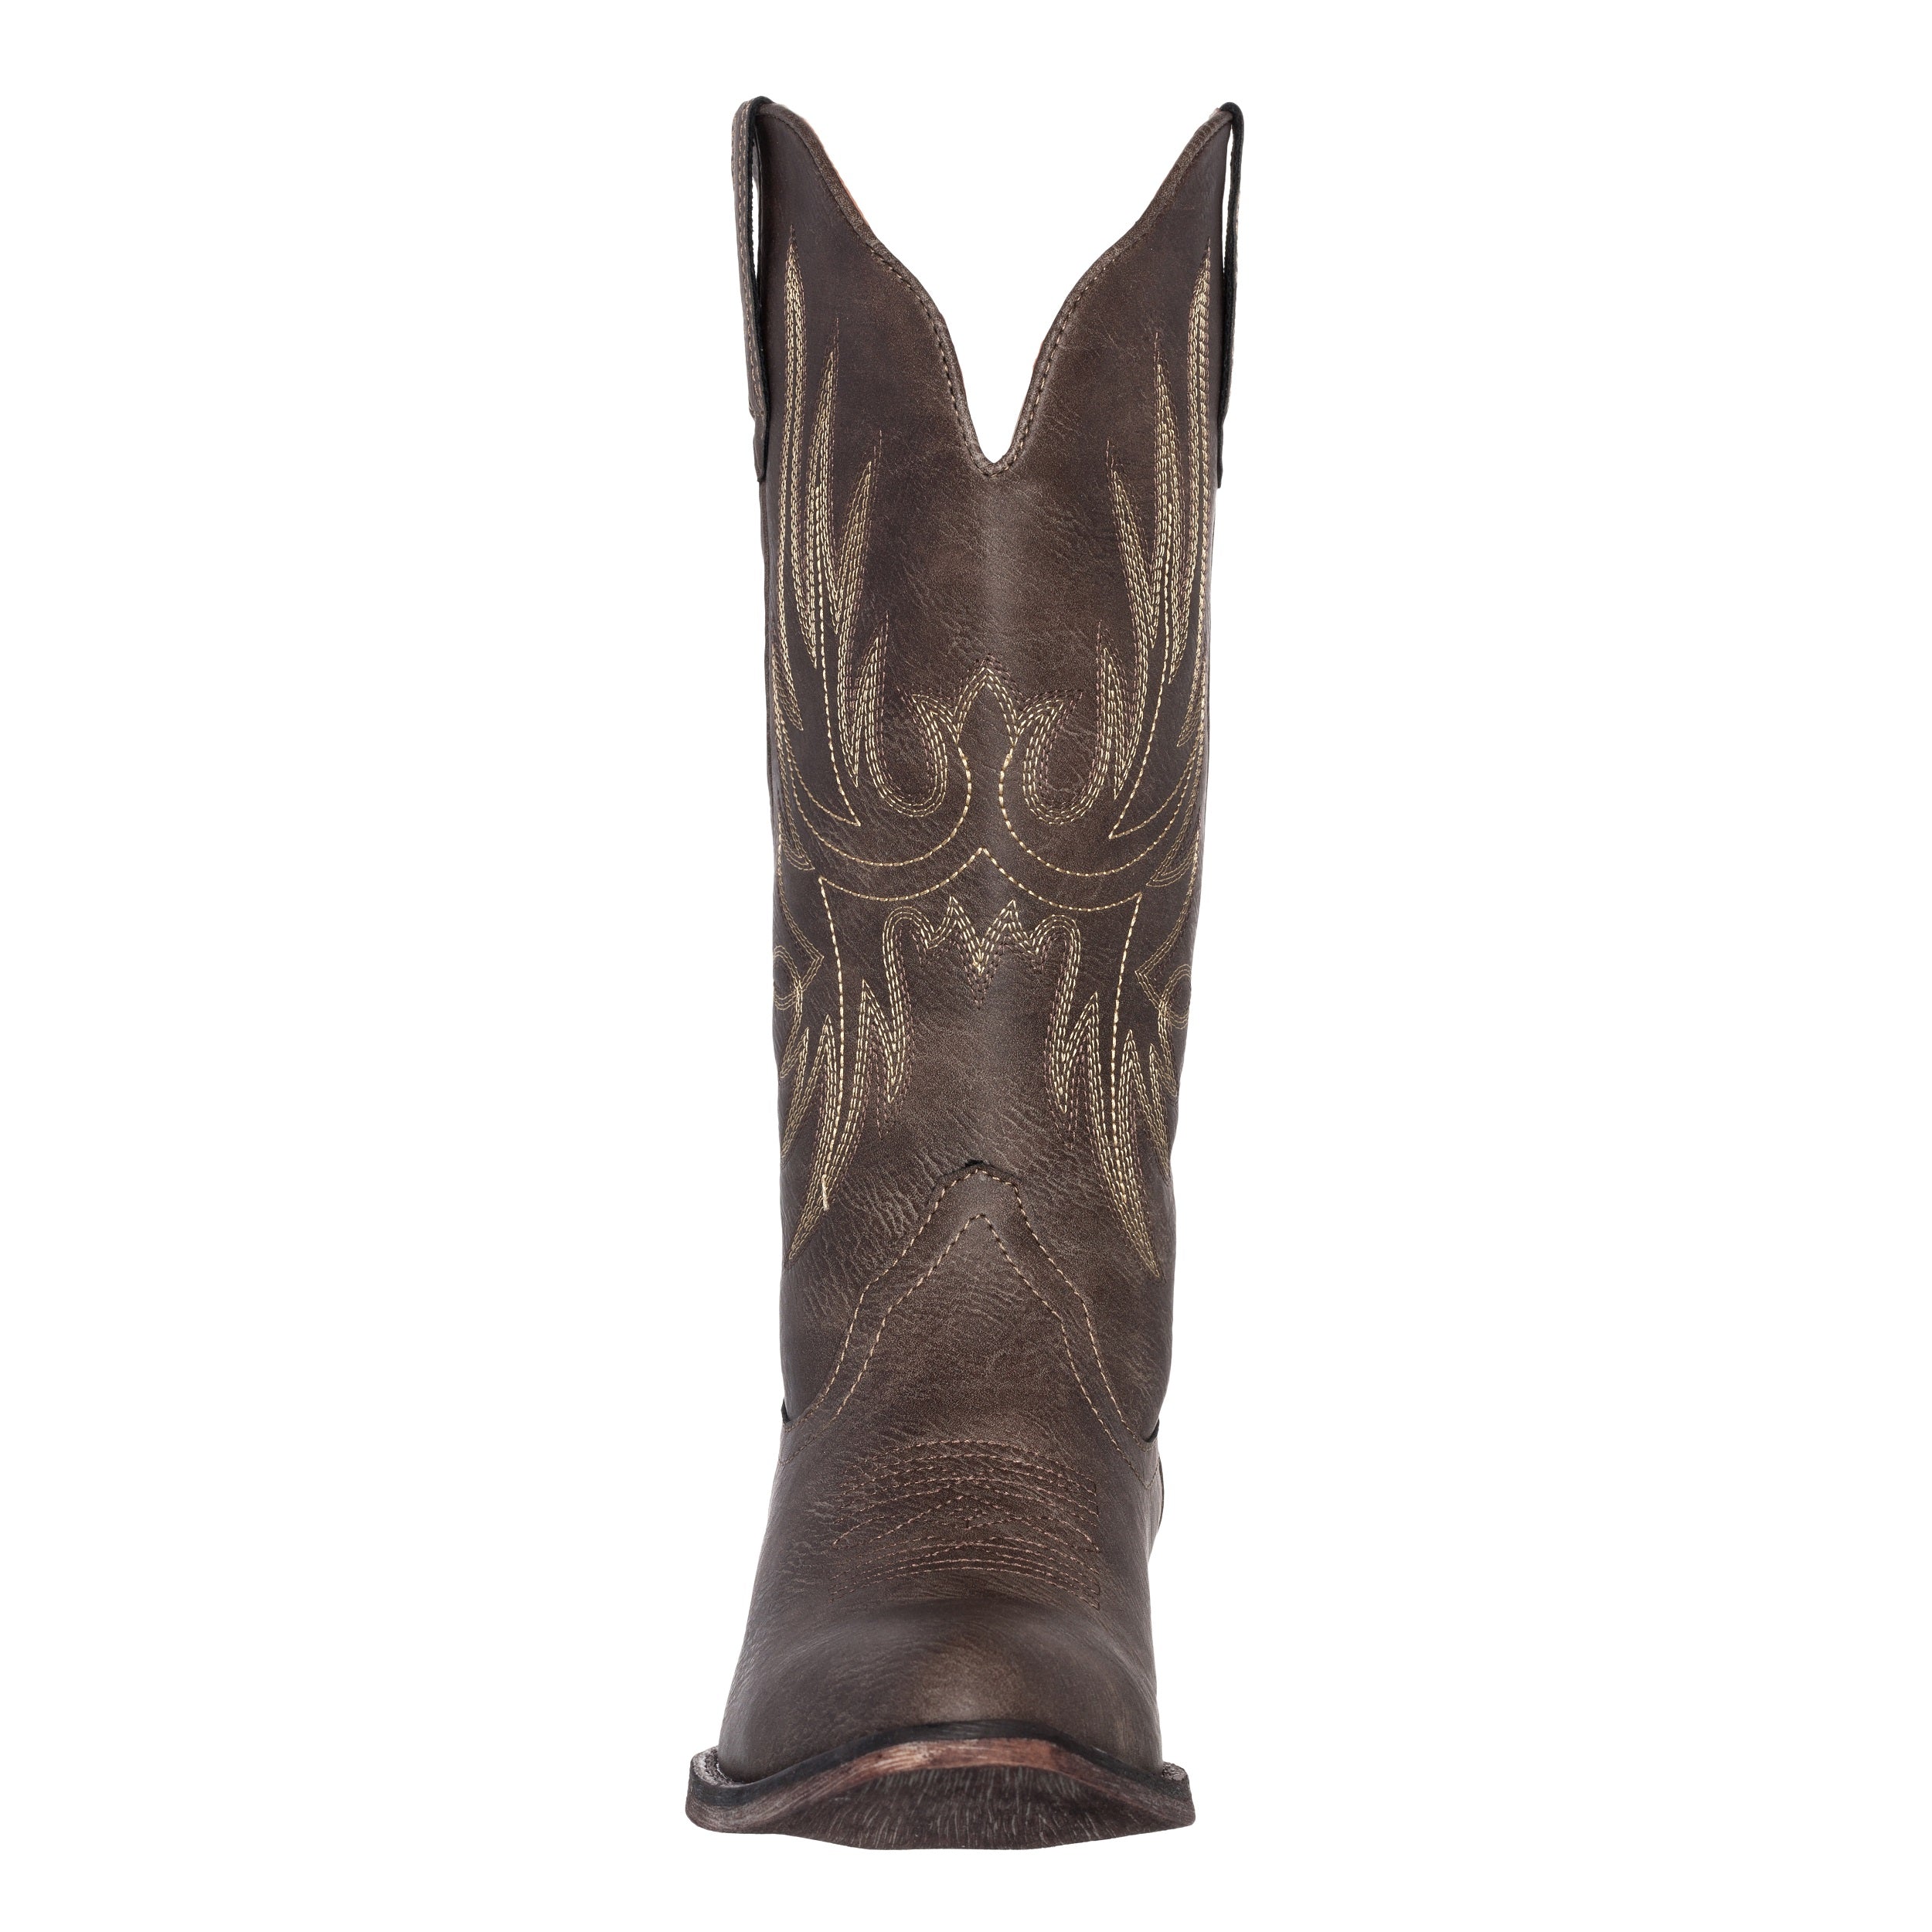 Women&#39;s Western Cowgirl Cowboy Boot | Brown Dallas Pointed Toe by Silver Canyon